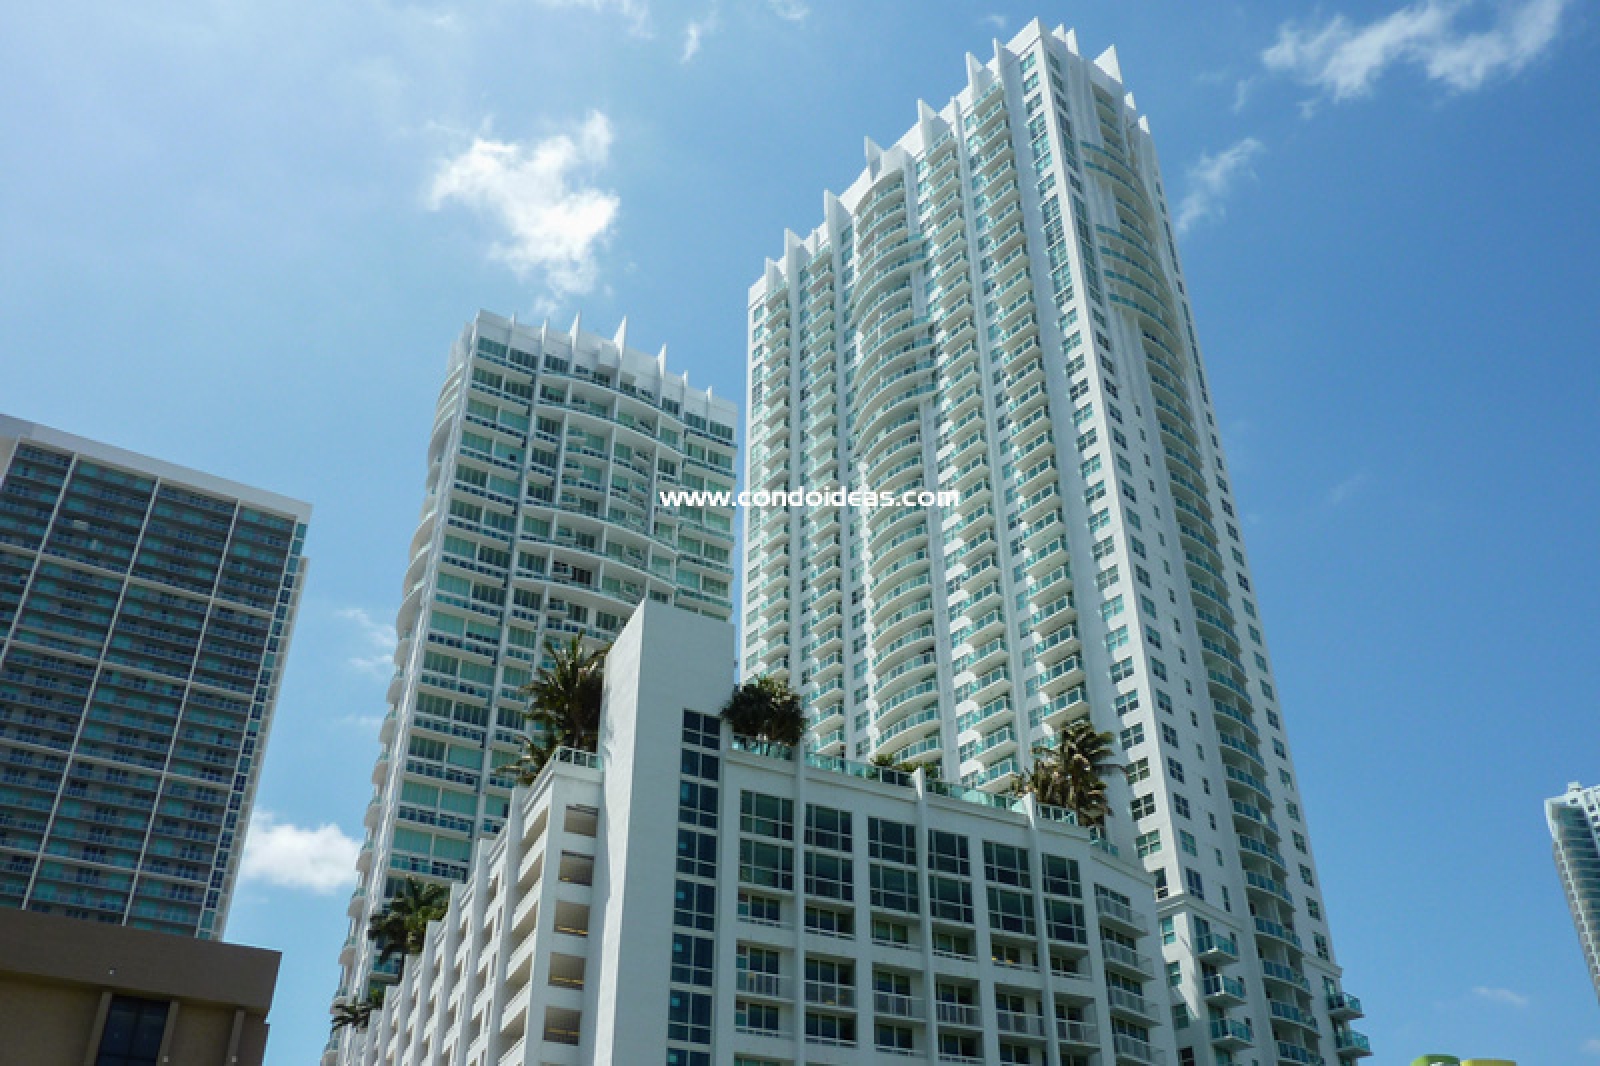 Brickell on the river condo - South Tower